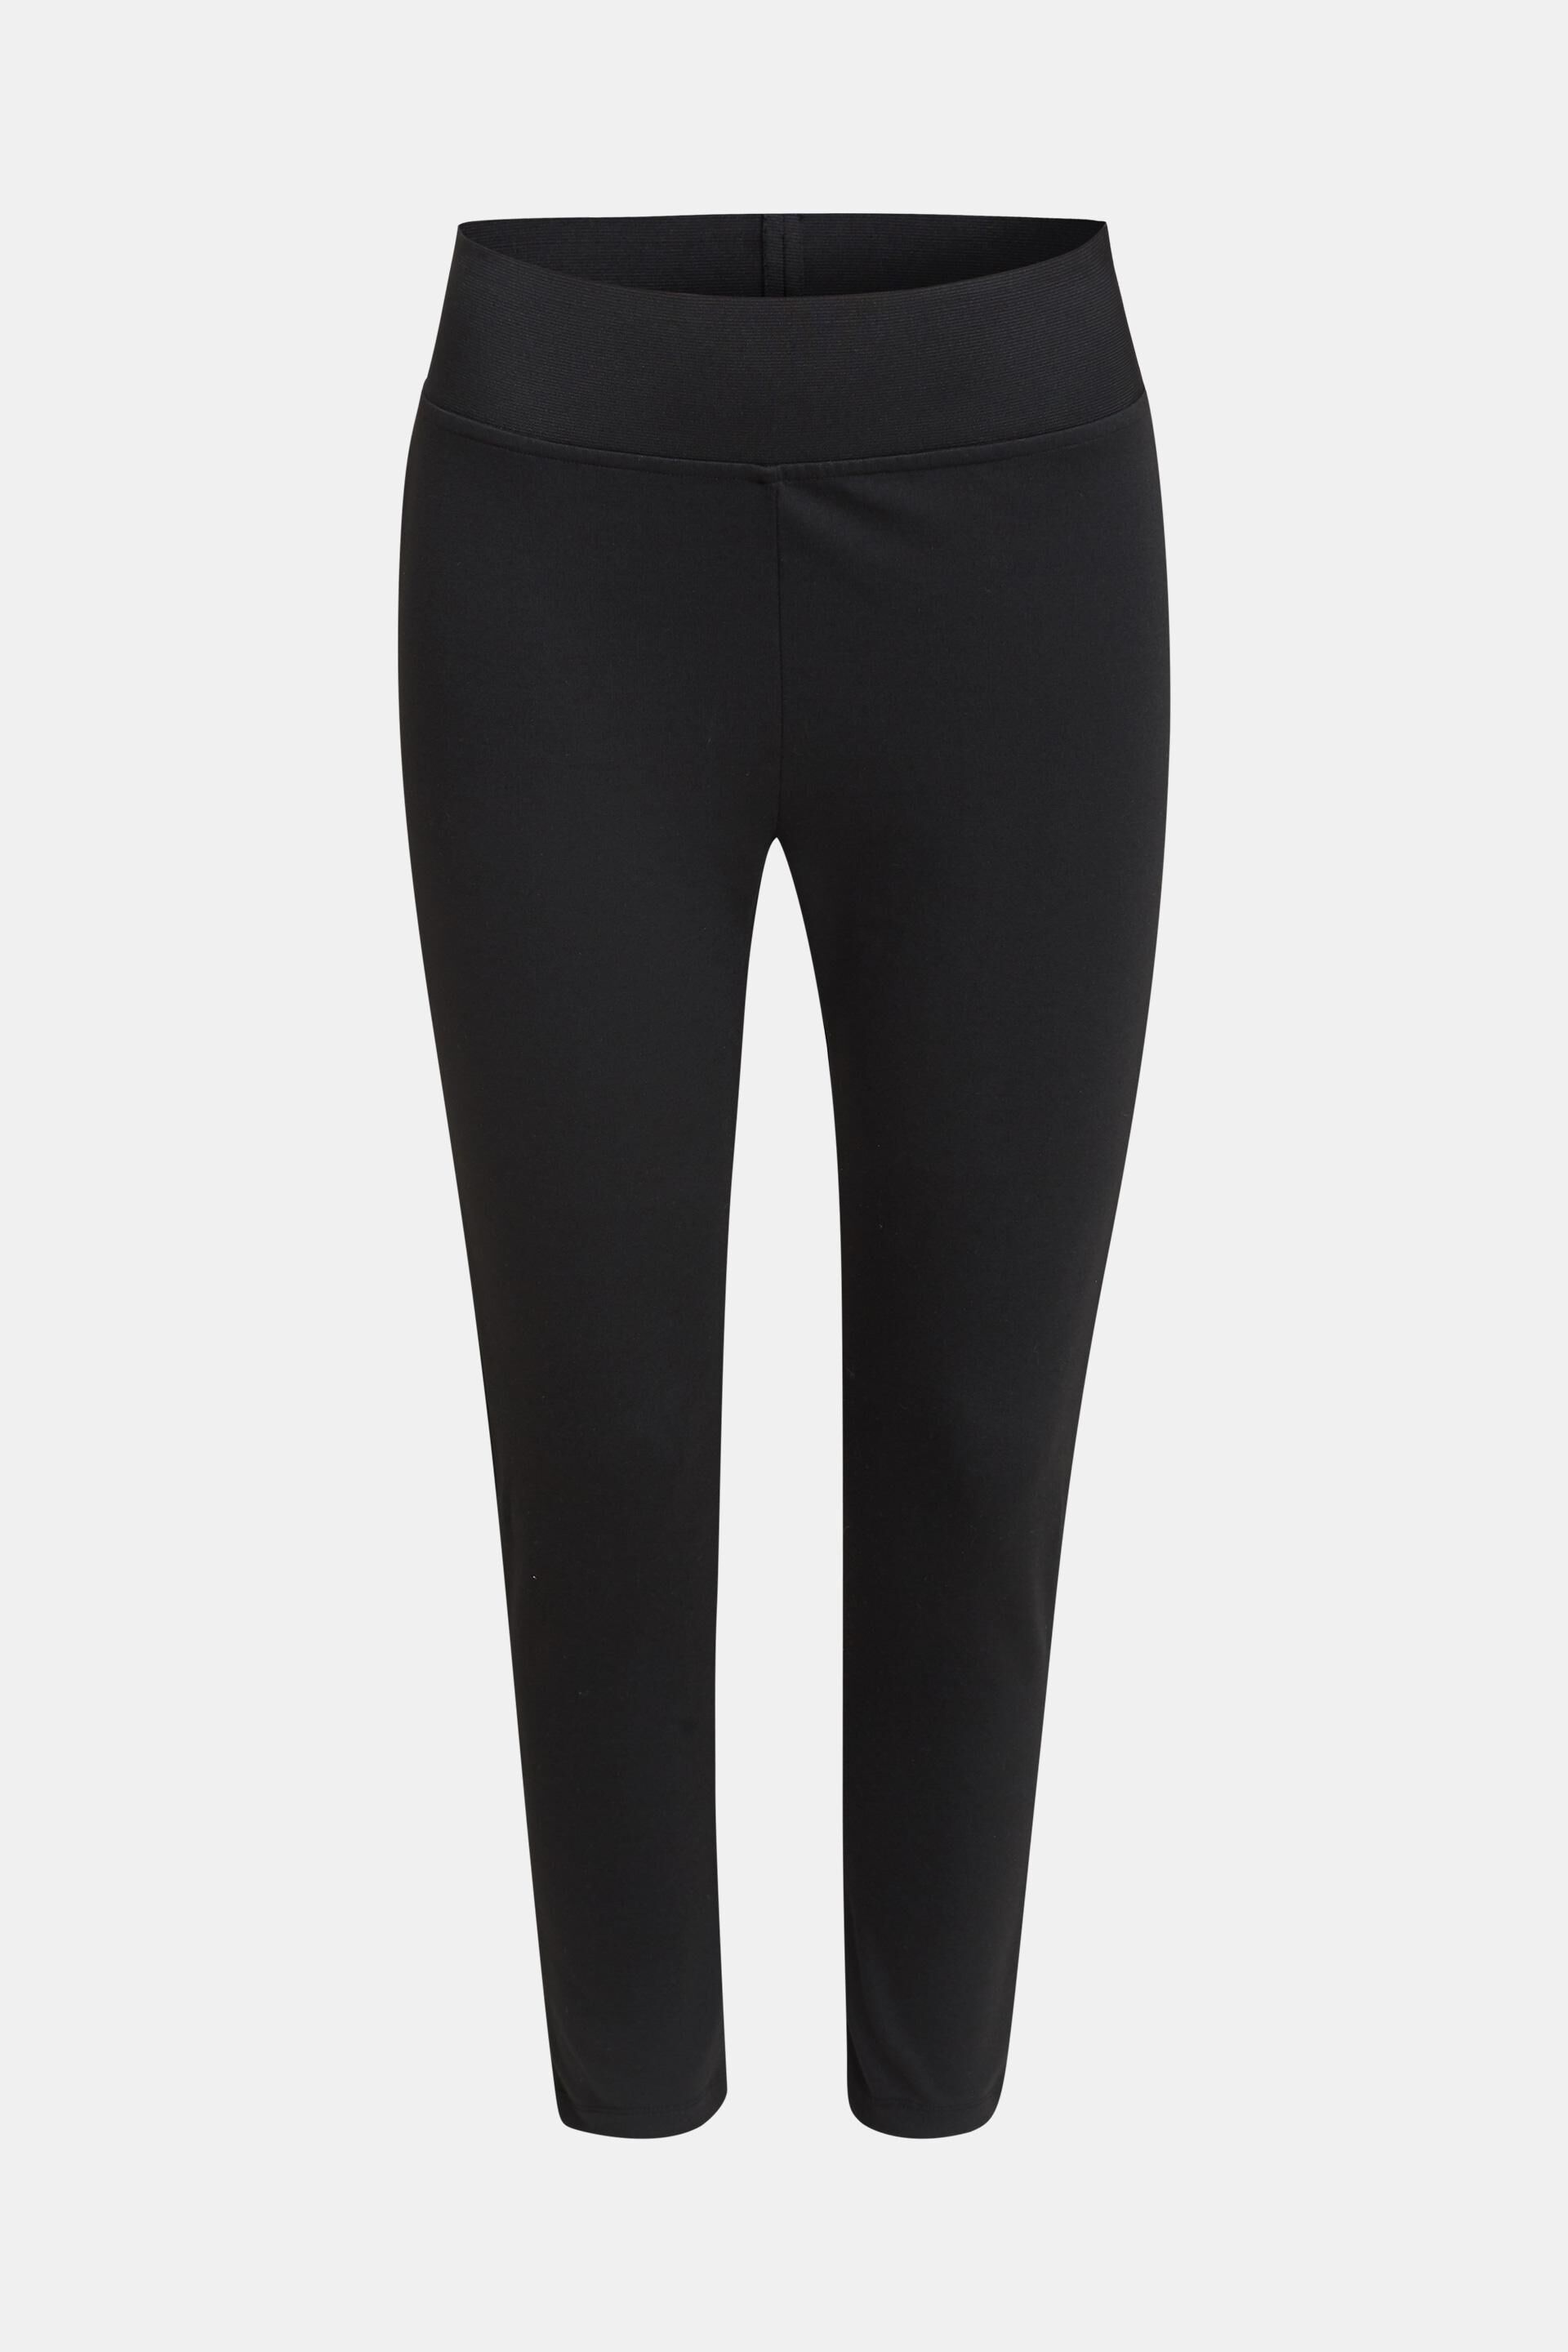 Buy Leggings Beauty with active cellulite treatment online | ITEM m6